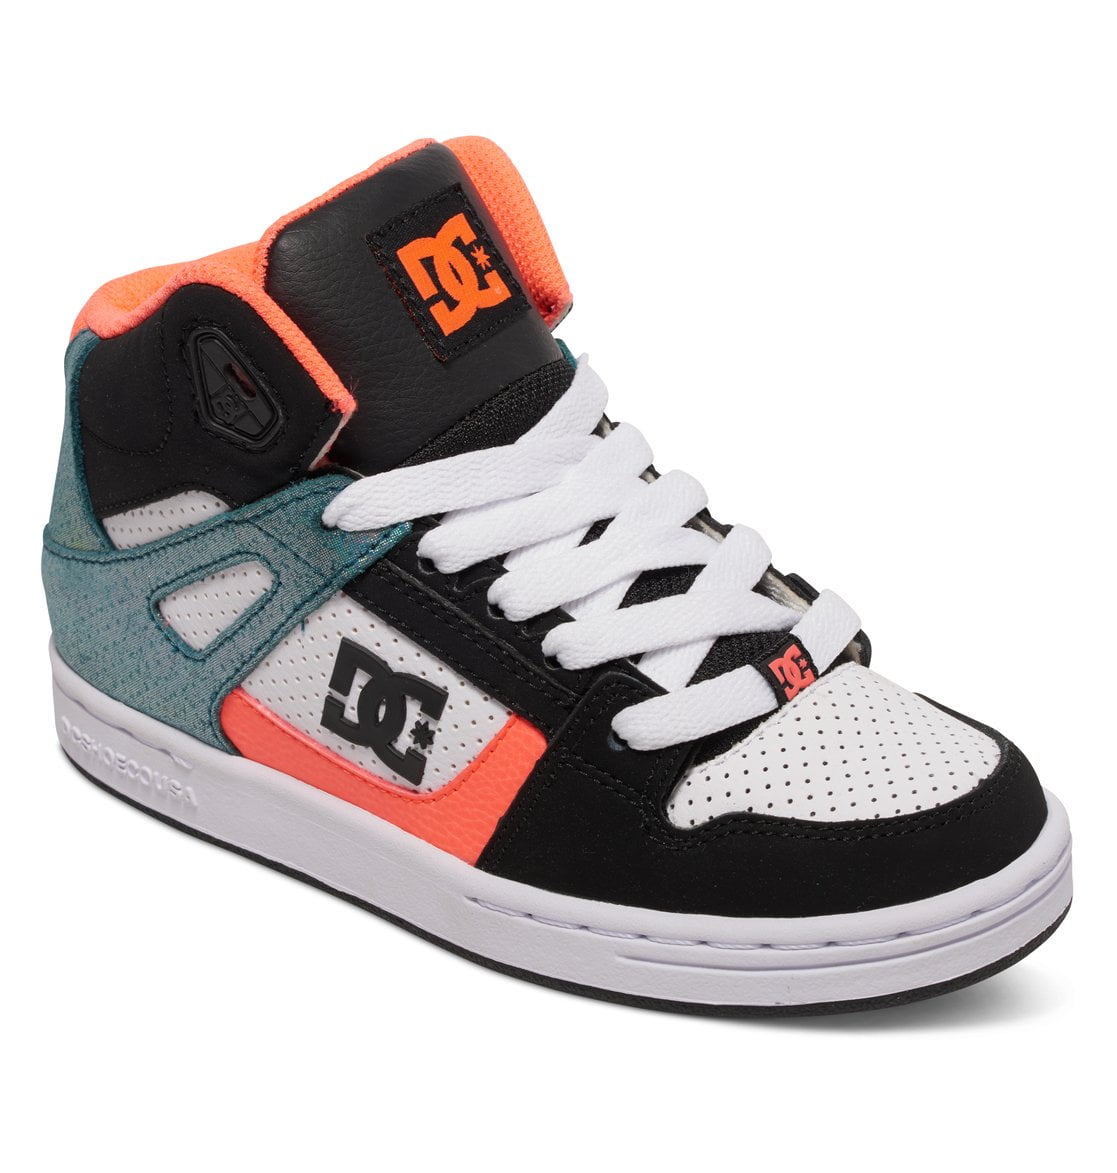 DC SHOES REBOUND BLACK MULTI YOUTH HI TOP TRAINERS 